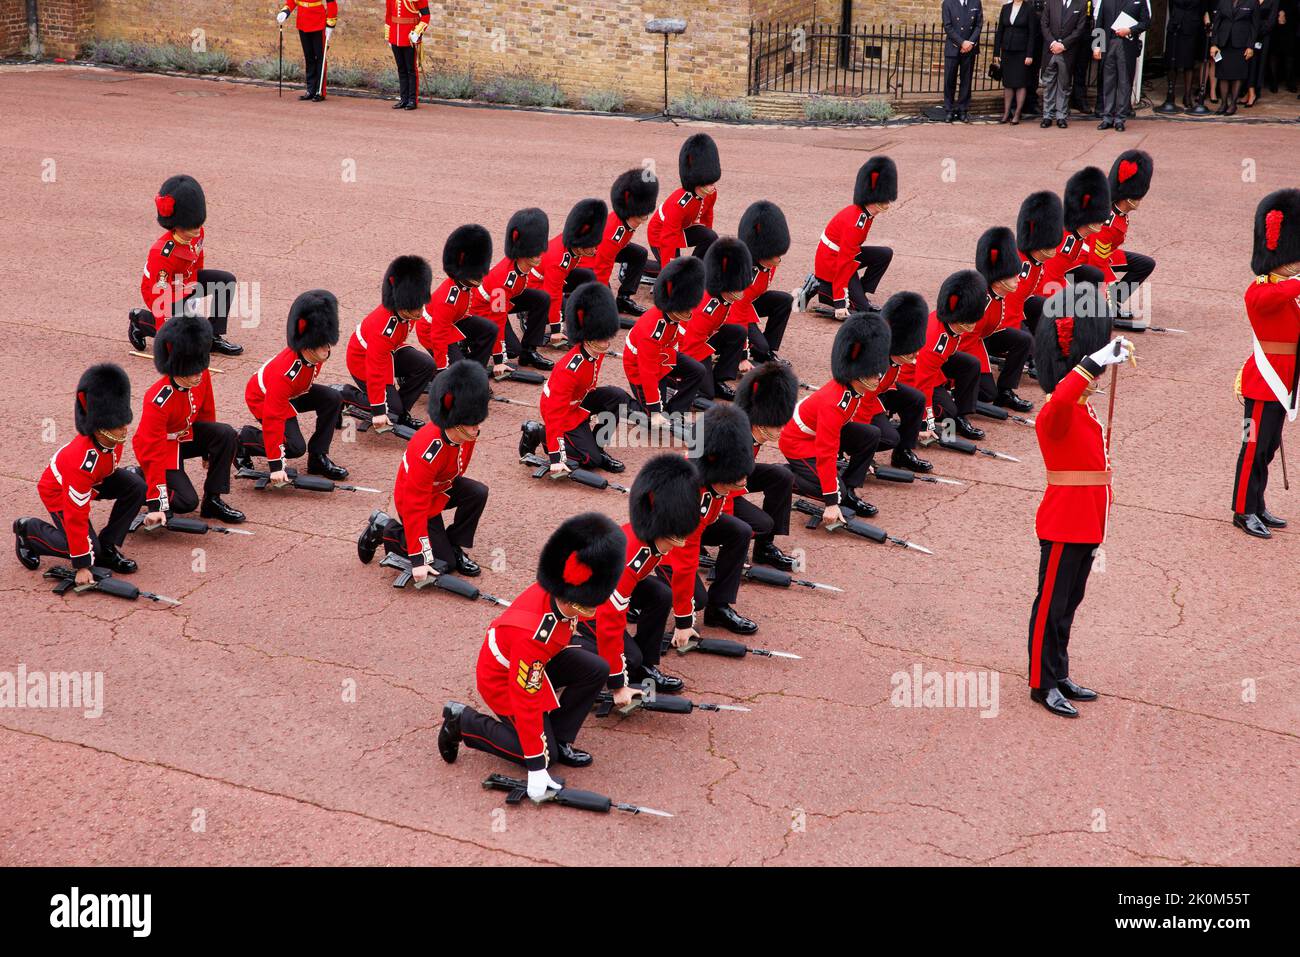 Members of the Coldstream guards take part in the Proclamation ceremony in Friary Court before the accession council, as King Charles III is proclaime Stock Photo